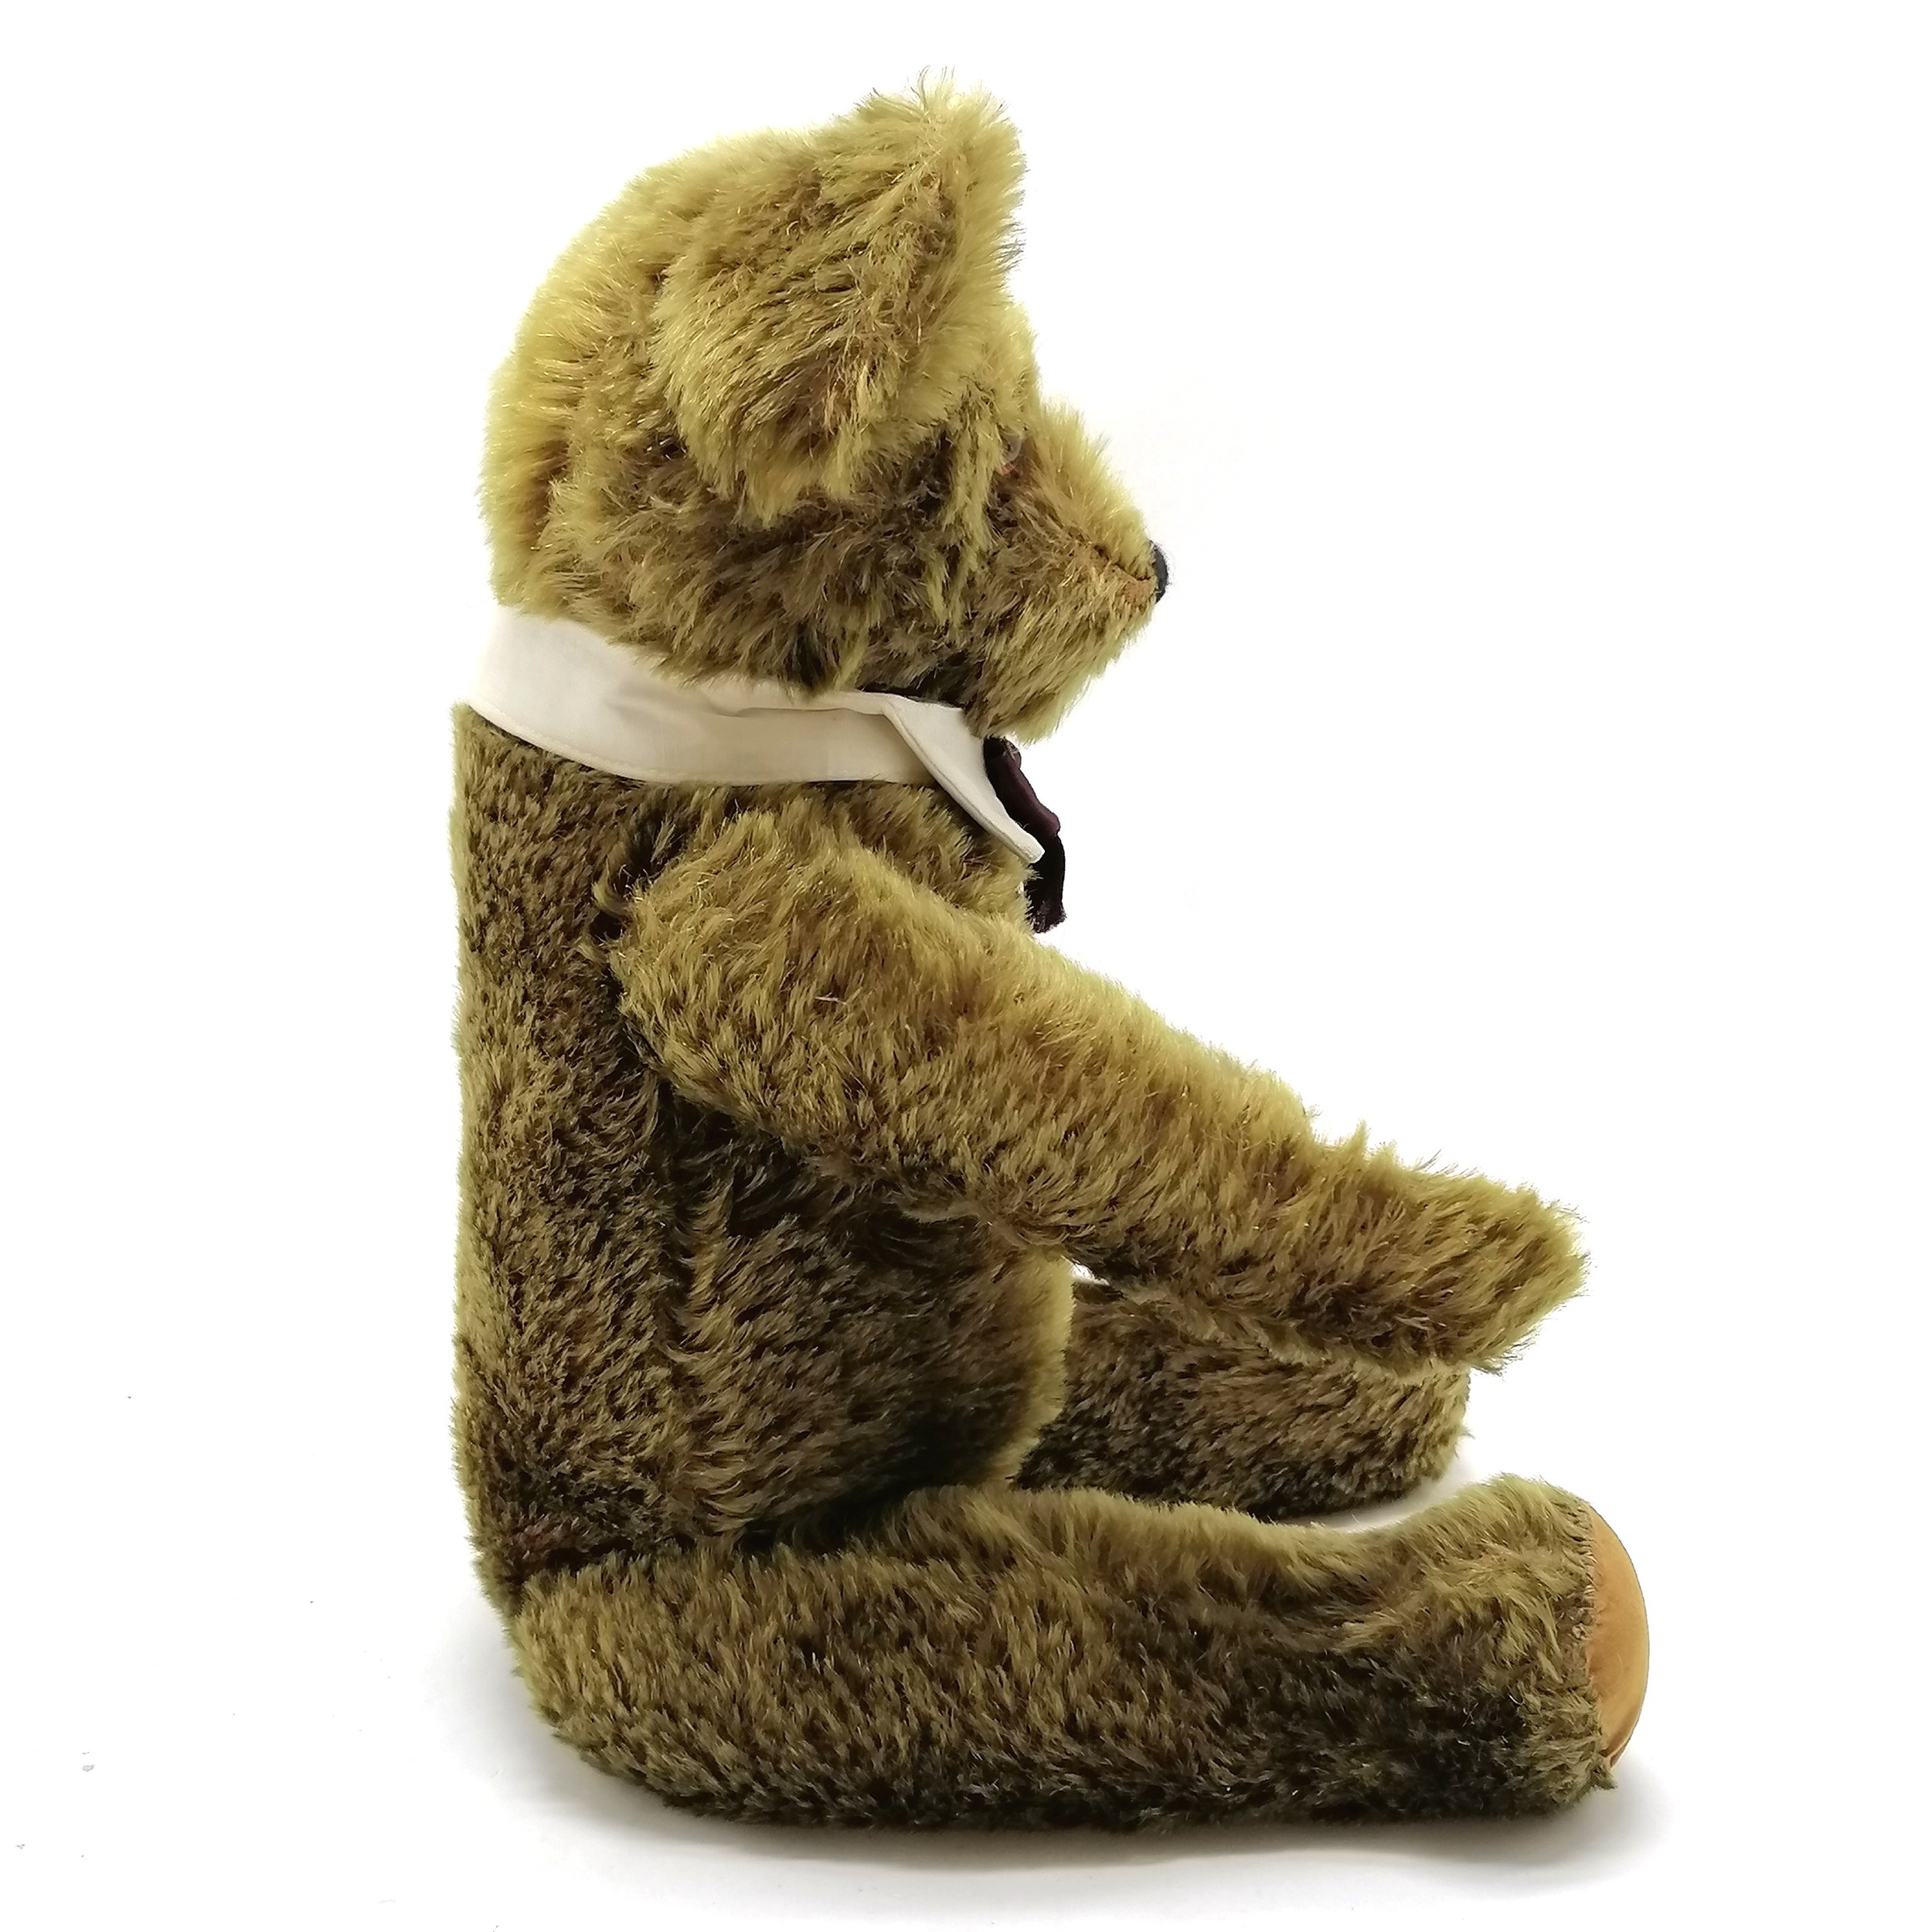 Vintage green mohair jointed Teddy bear 'Knickerbocker' c1940 with glass eyes and stitched nose - Image 3 of 9